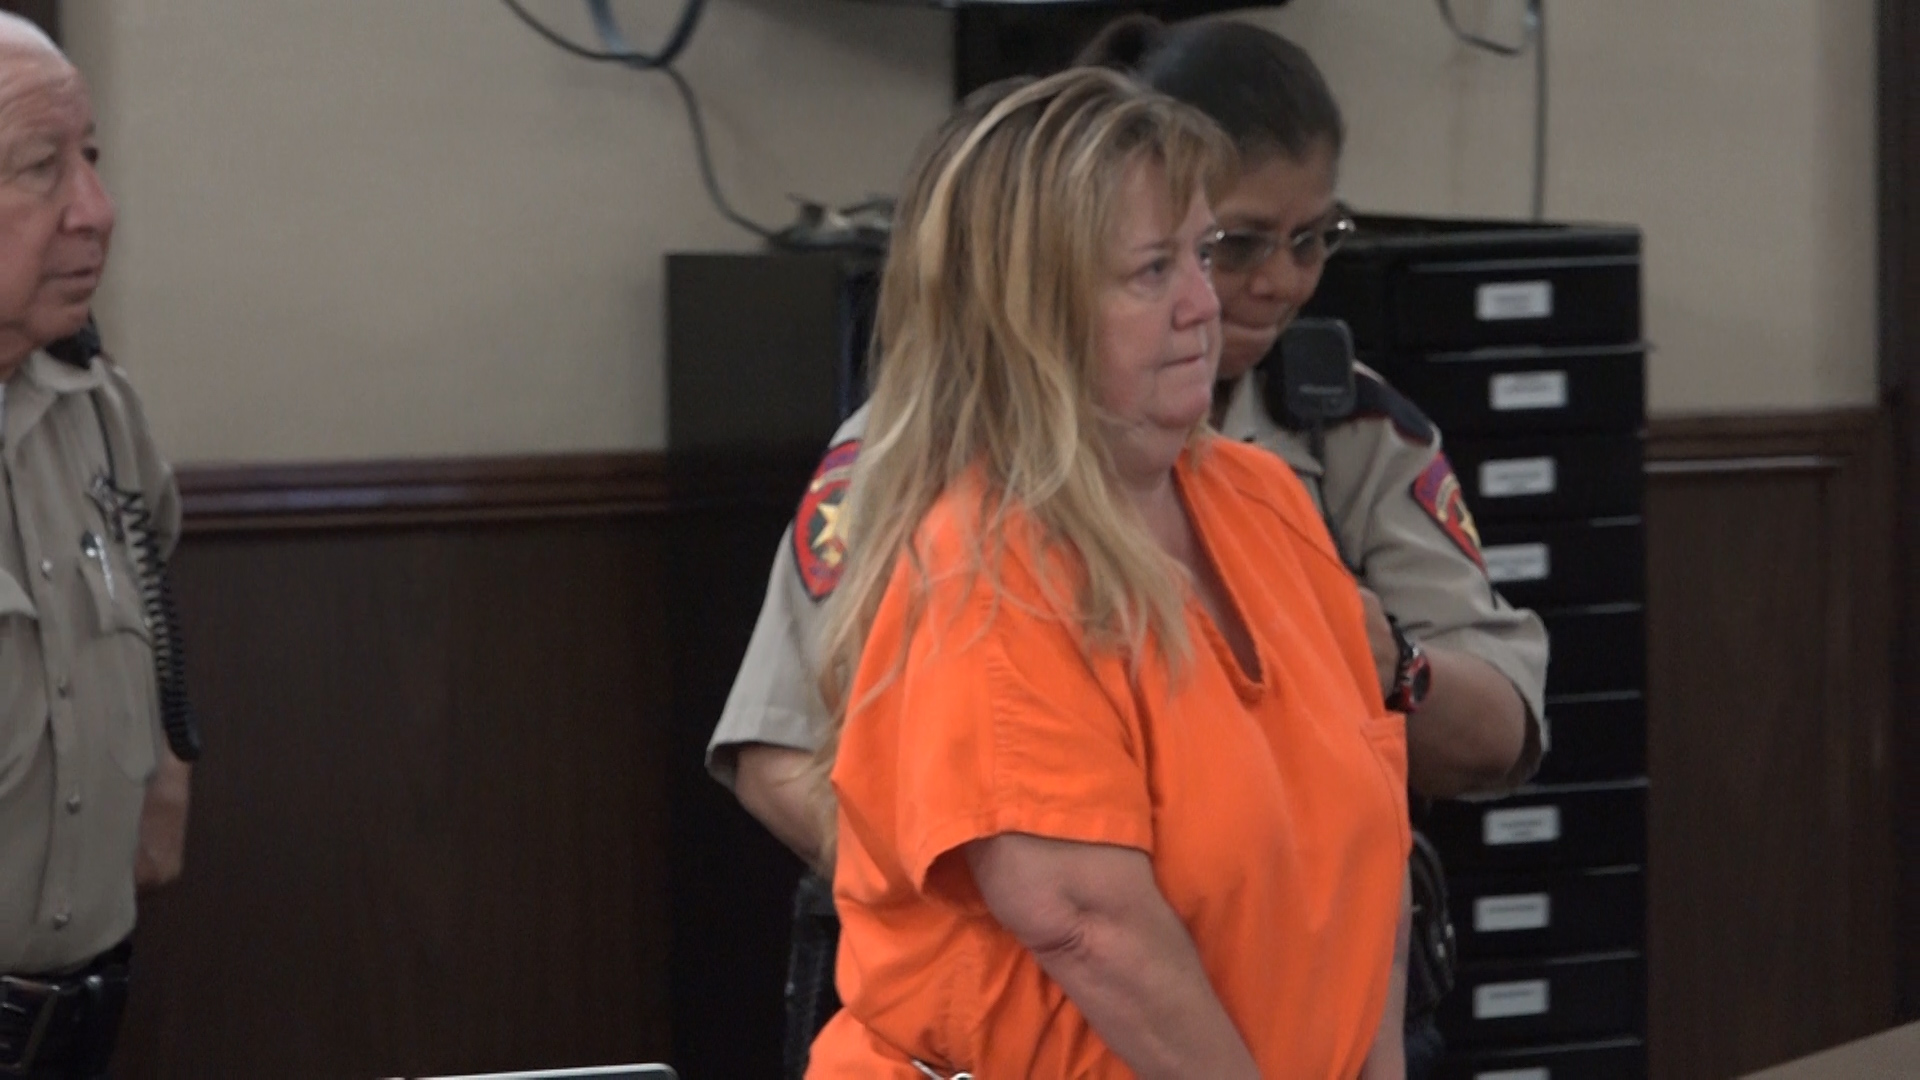 Woman Accused In Shooting Homicide Makes First Court Appearance 4311